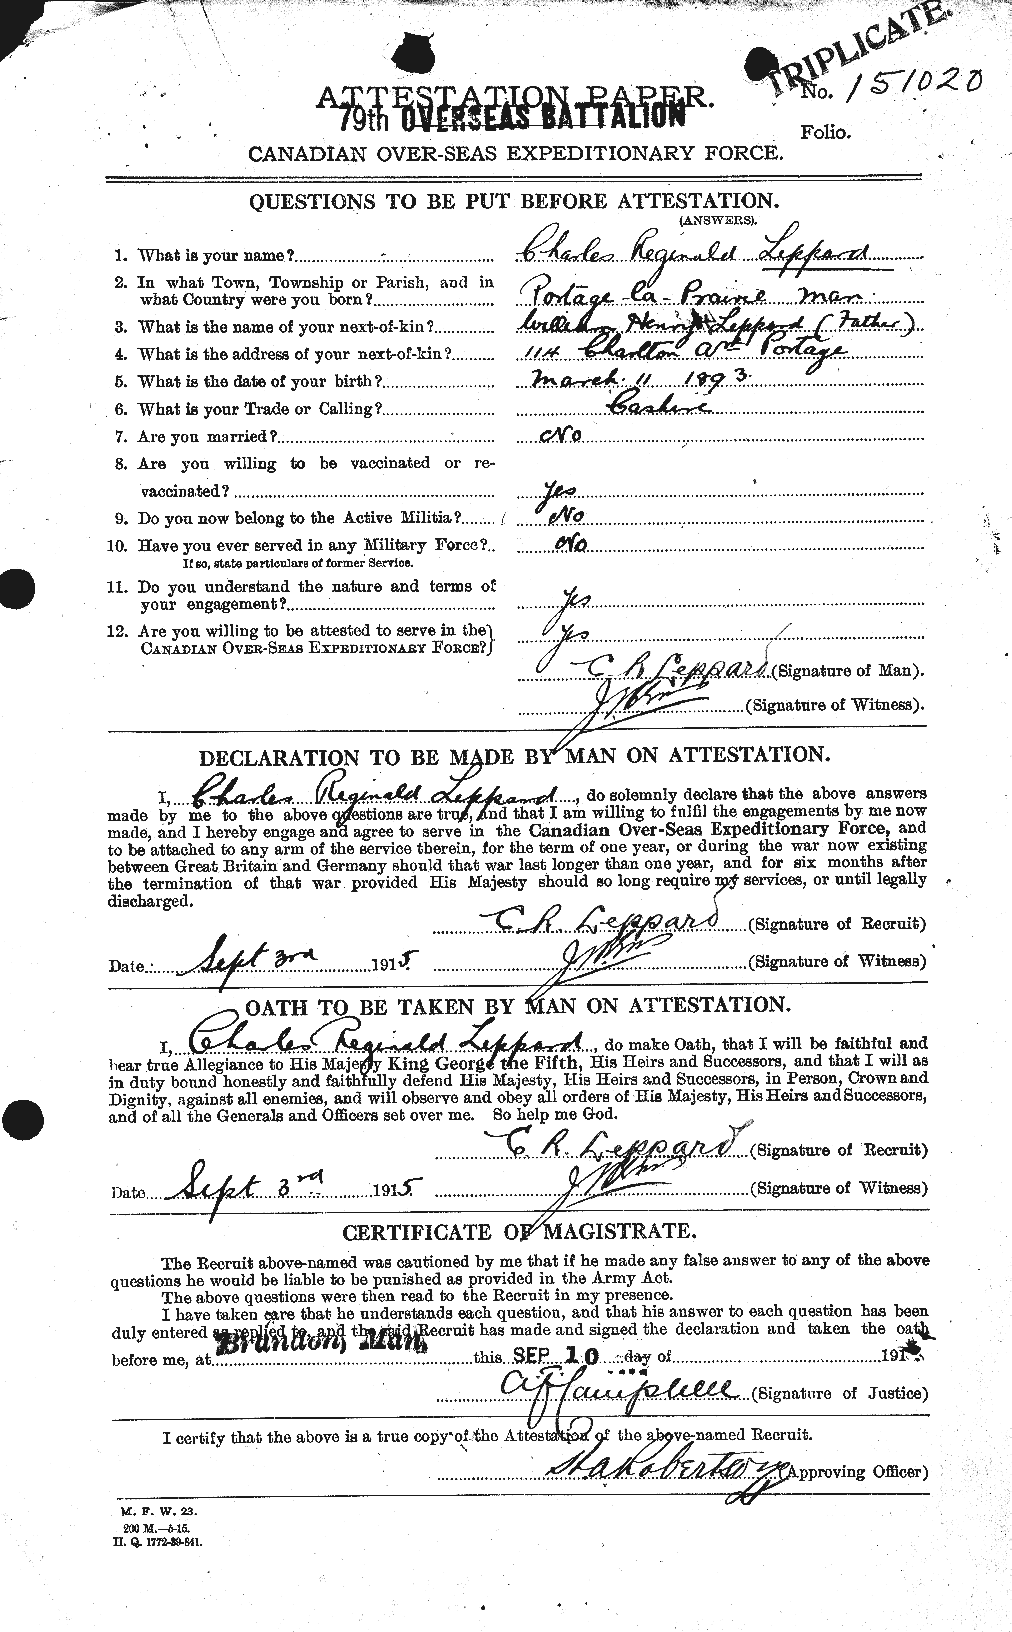 Personnel Records of the First World War - CEF 462980a